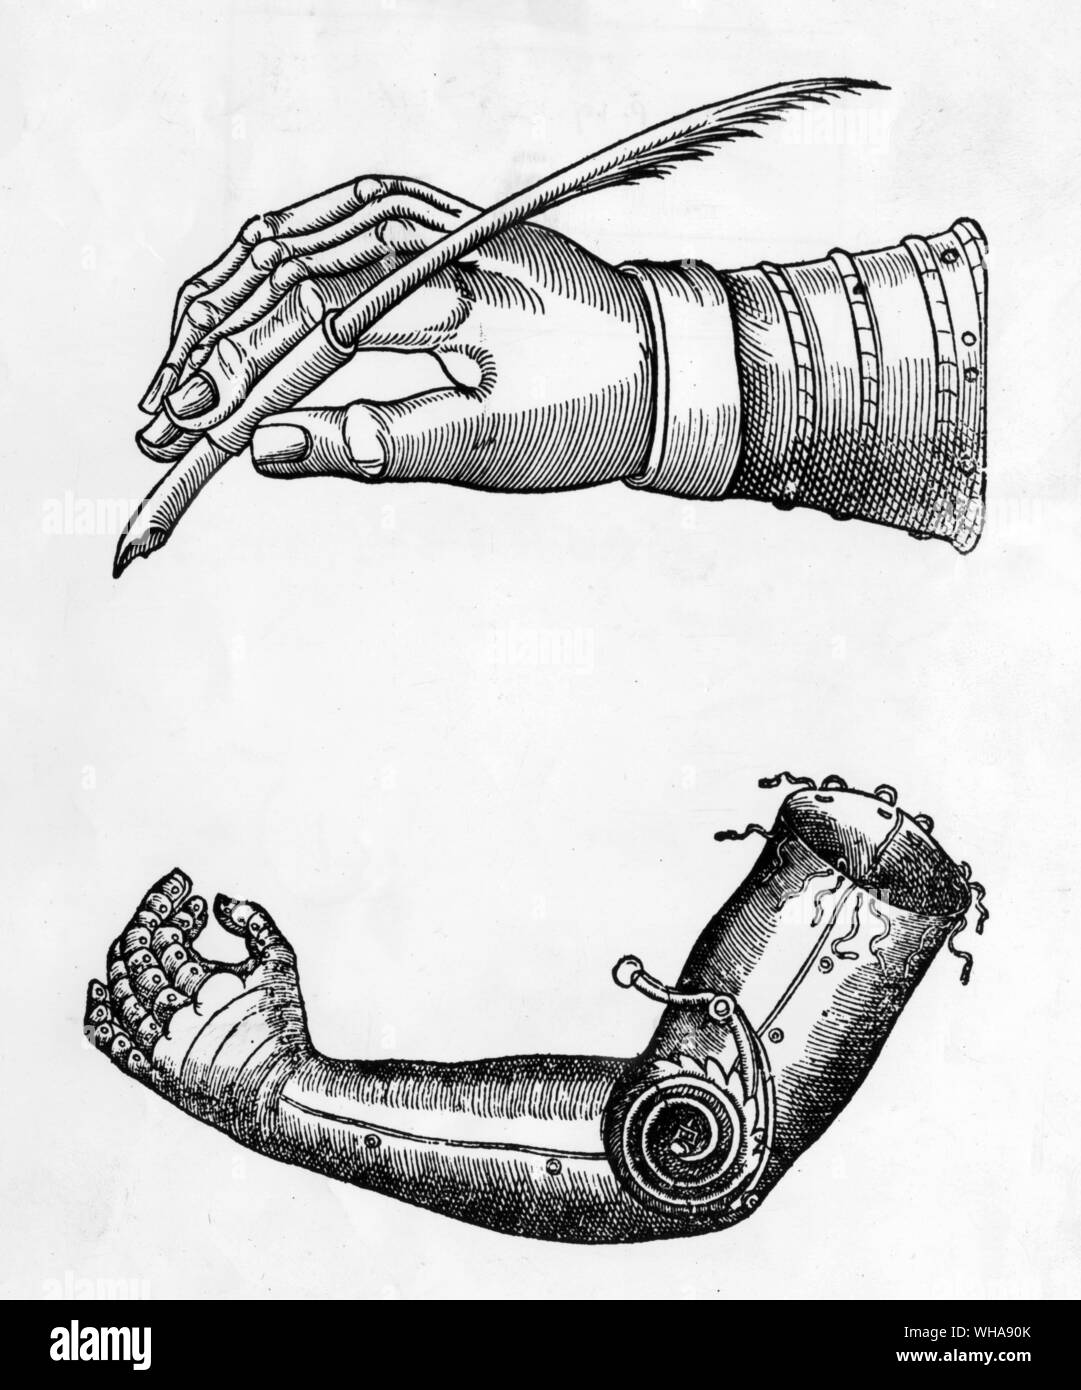 Artificial limbs, an artificial writing hand and artificial arm from Ambroise Pare, Oeuvres. 1510-1590 Stock Photo